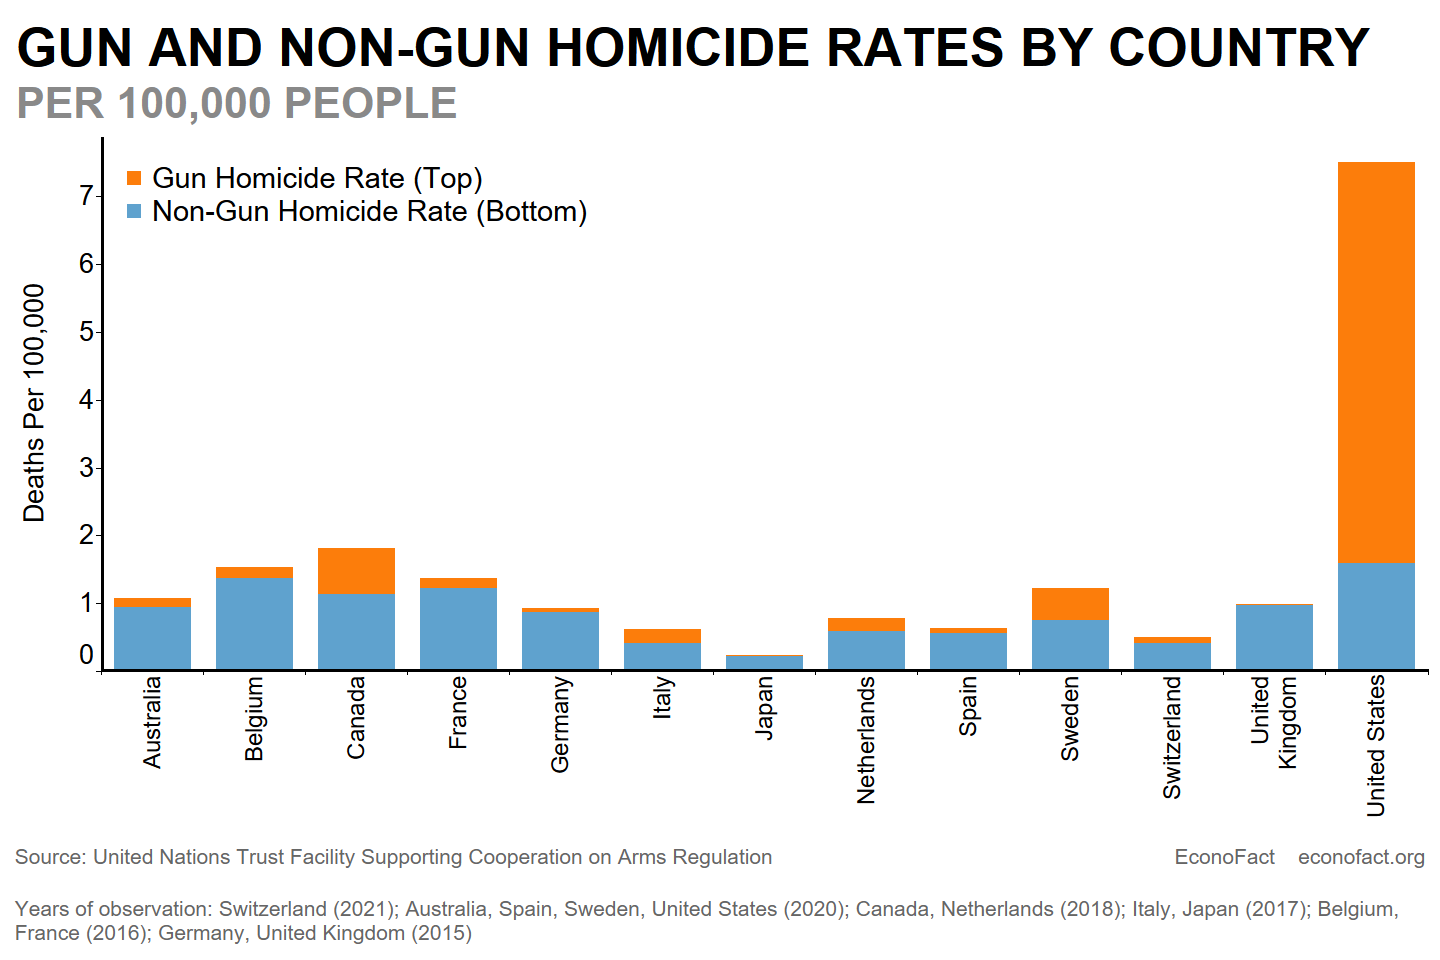 Gun and non-gun homicide rates for selected OECD countries. While other nations shown here have a higher non-gun homicide rate, in the U.S., the gun homicide rate is ~3.7x the non-gun homicide rate.